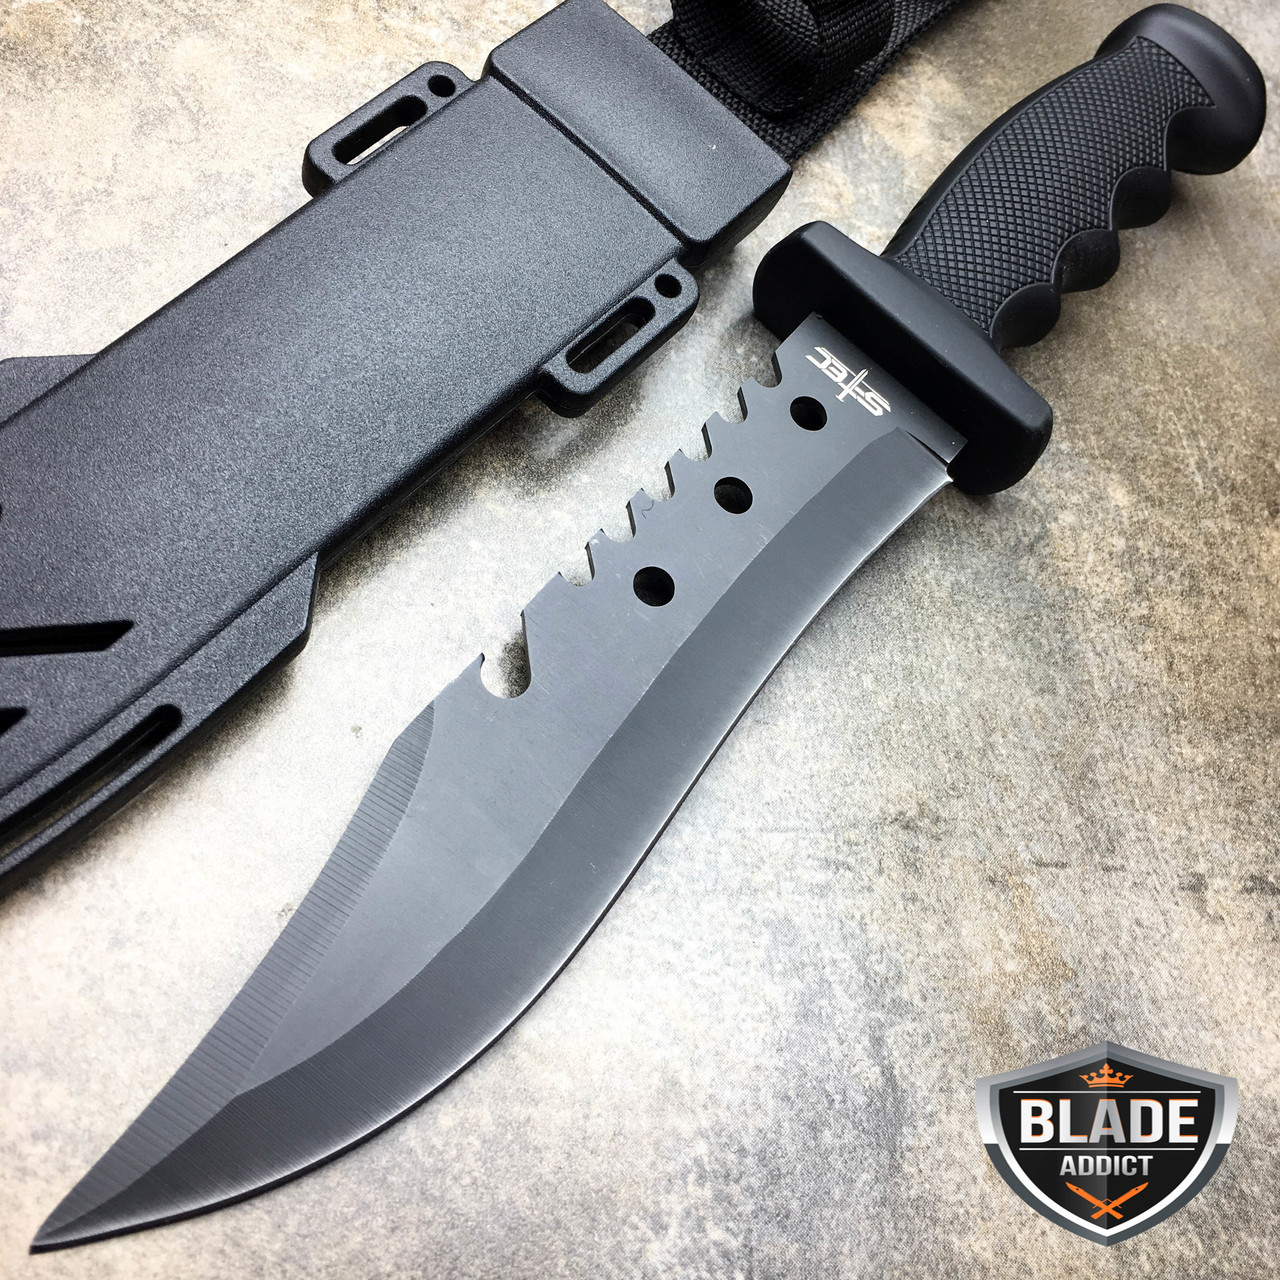 12 Black Tactical Survival Rambo Hunting Fixed Blade Knife Bowie W